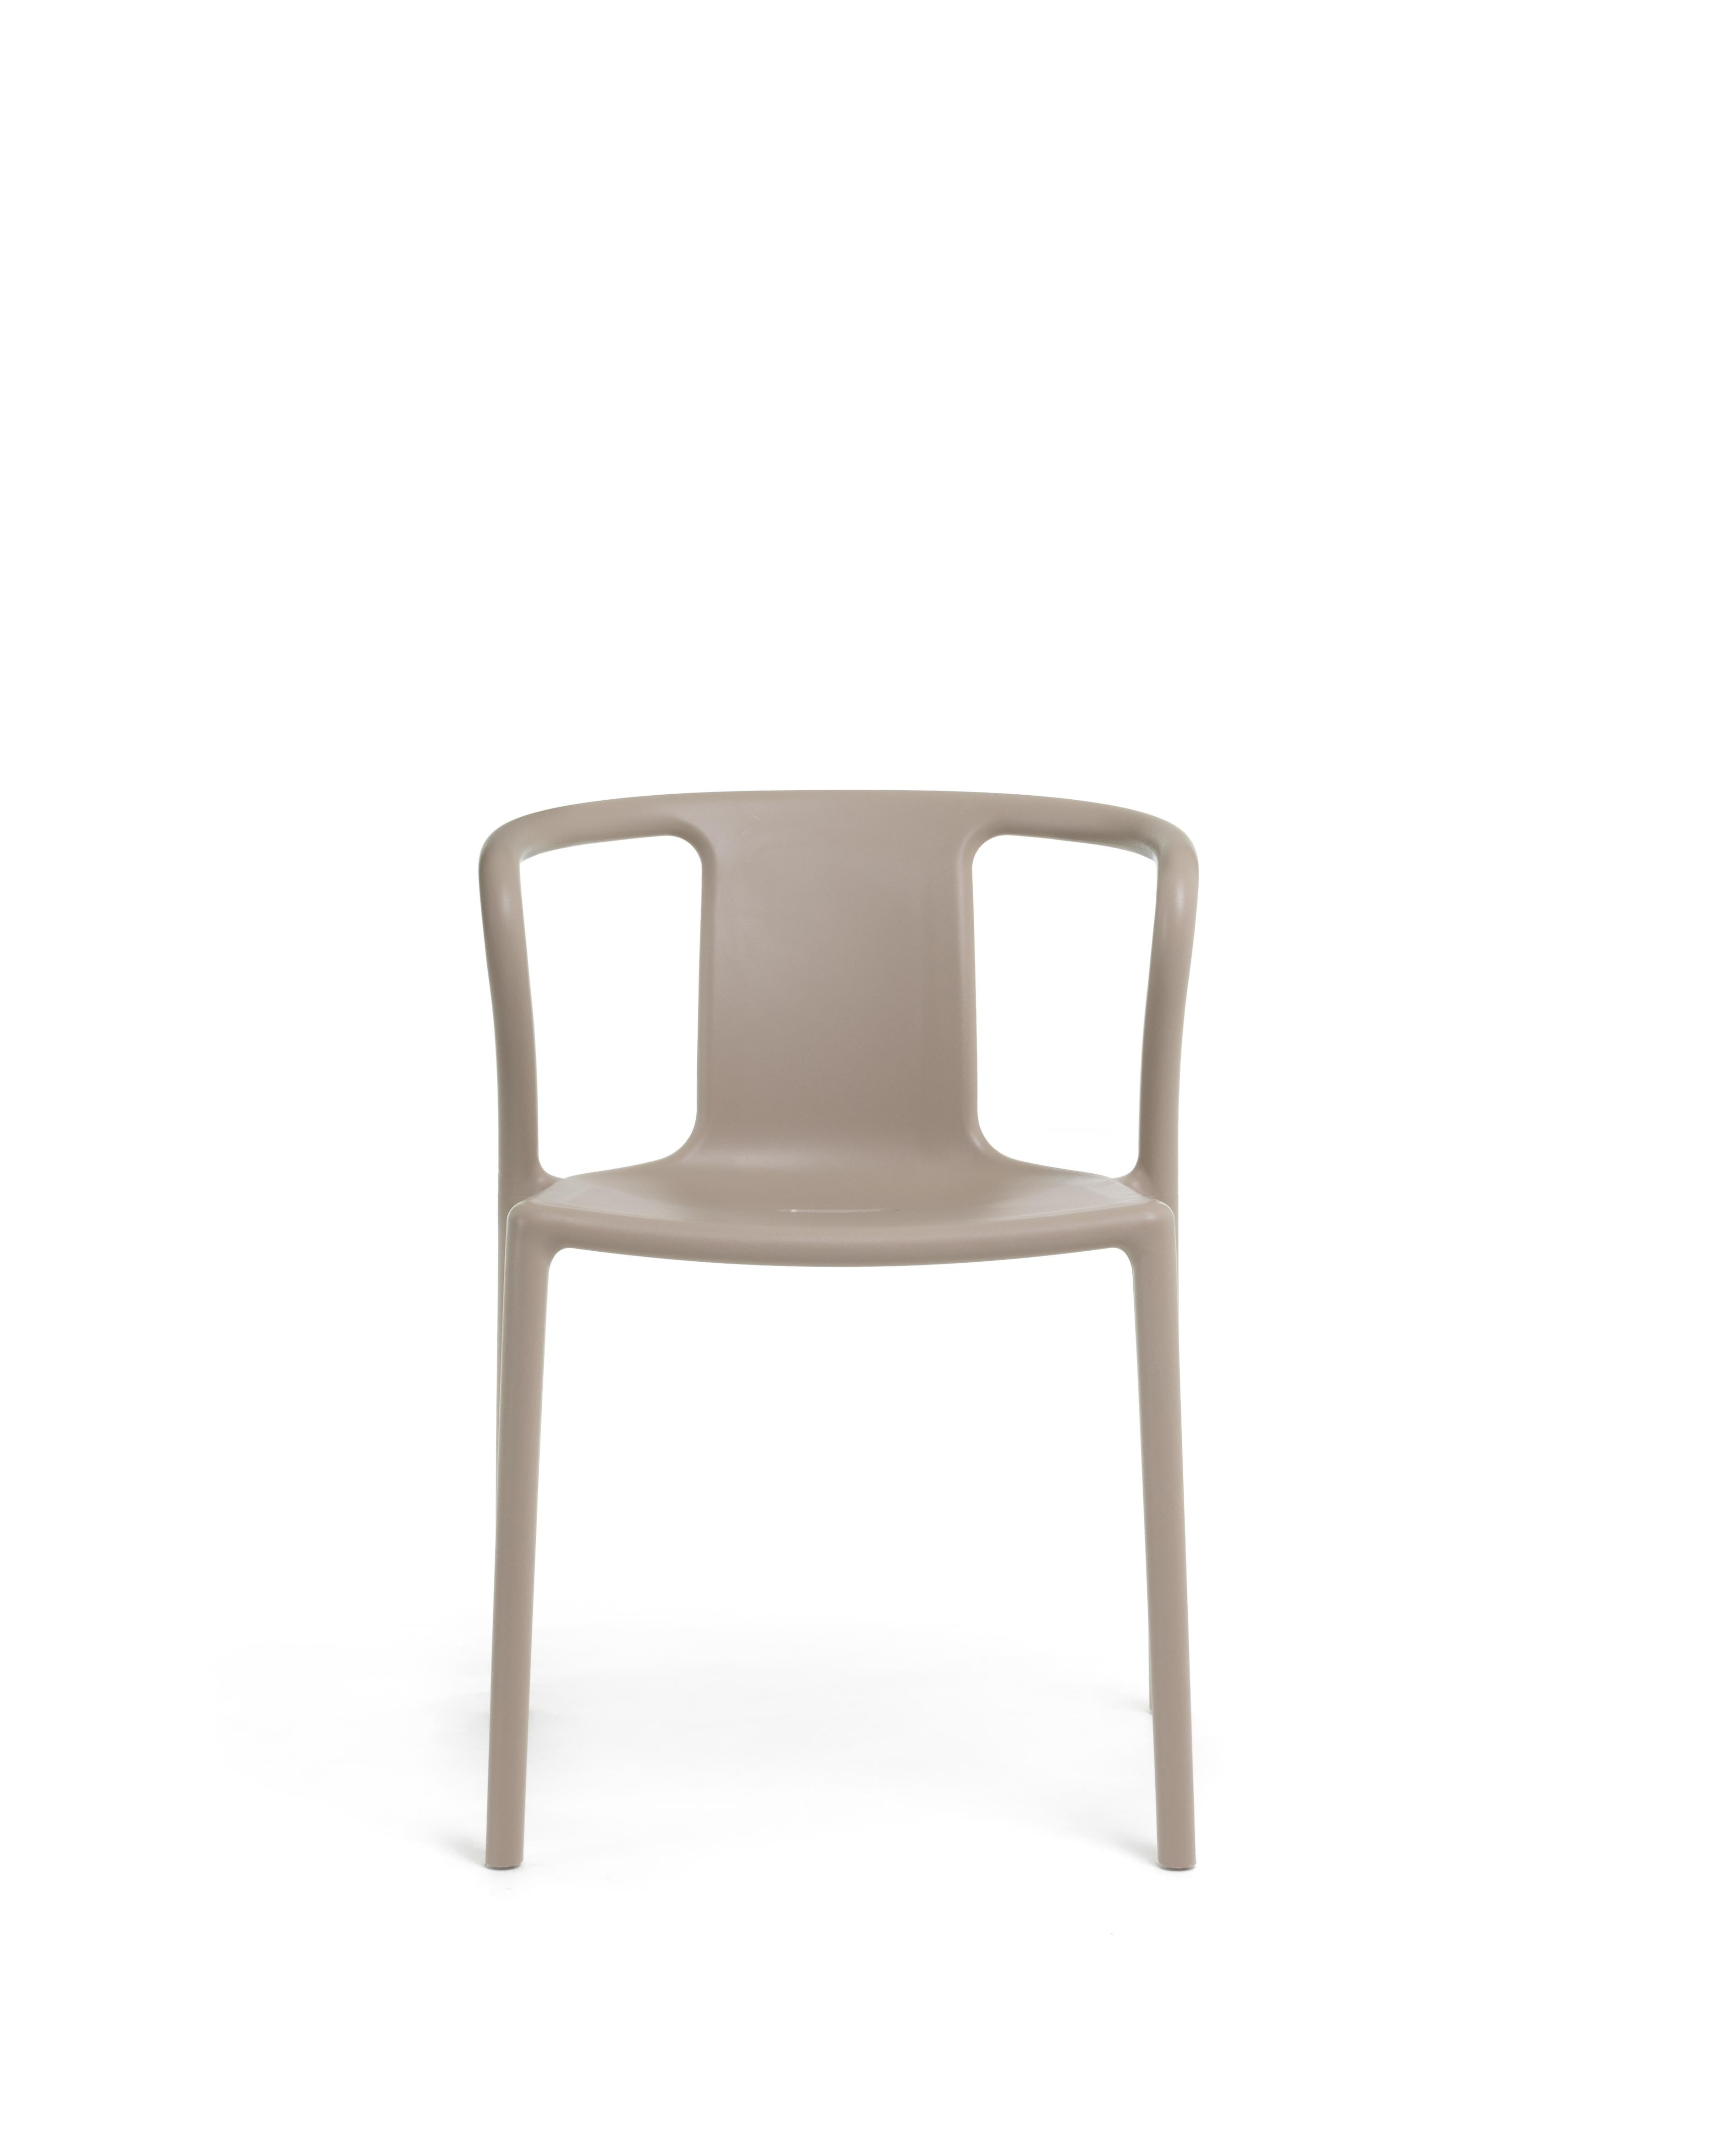 Set of 4 Air-ArmChair  by Konstantin Grcic for MAGIS In New Condition For Sale In Brooklyn, NY